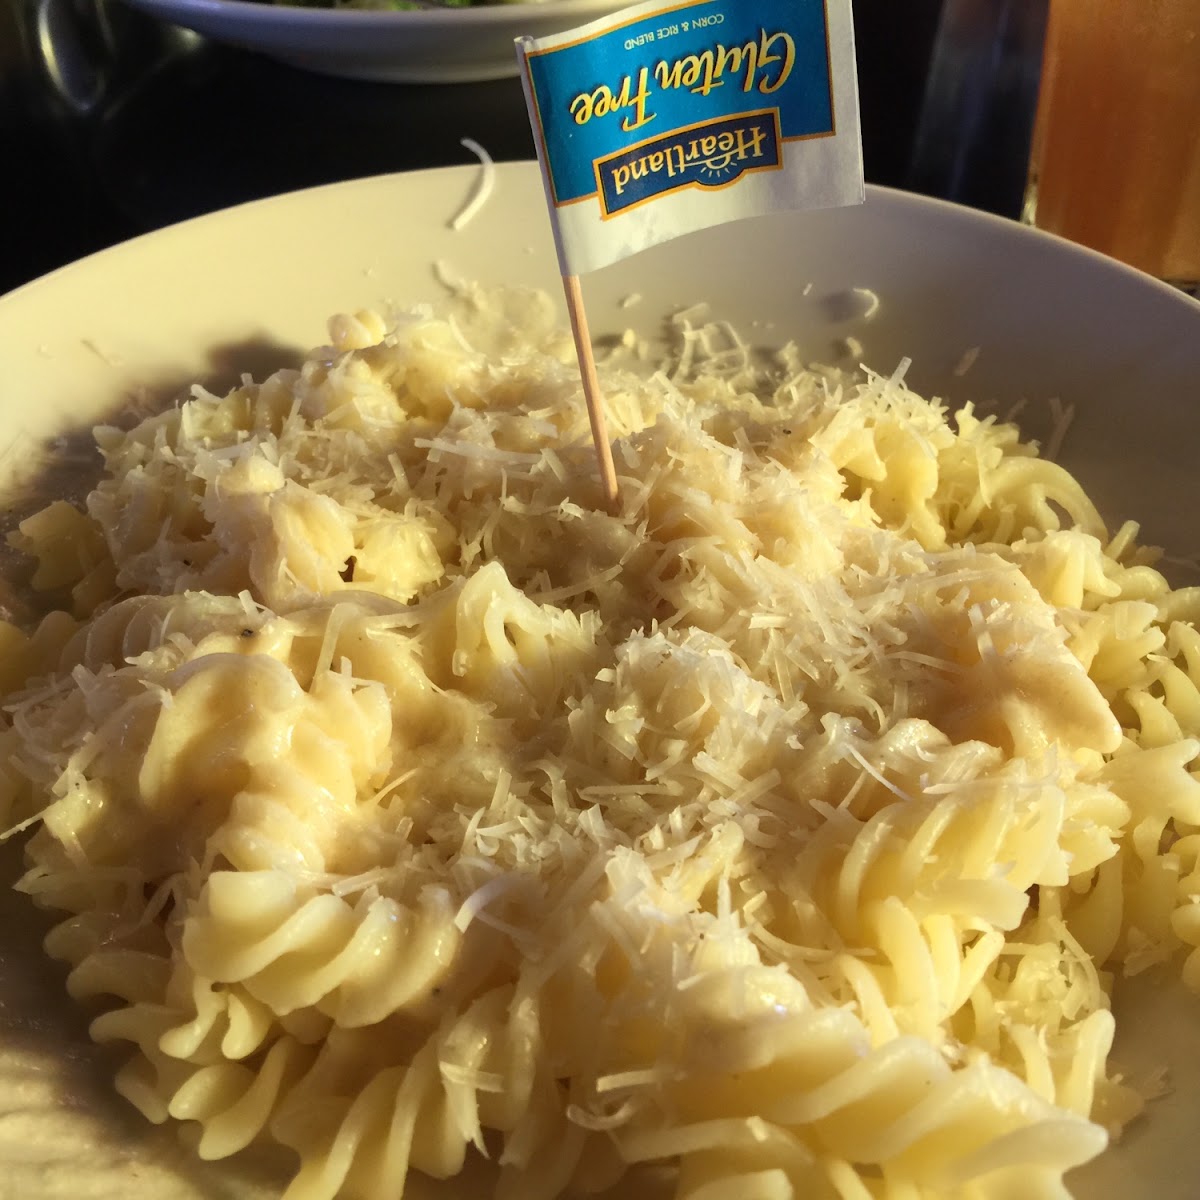 Alfredo sauce. Upside down flags usually mean 'ship in distress', but this meal caused no distress f